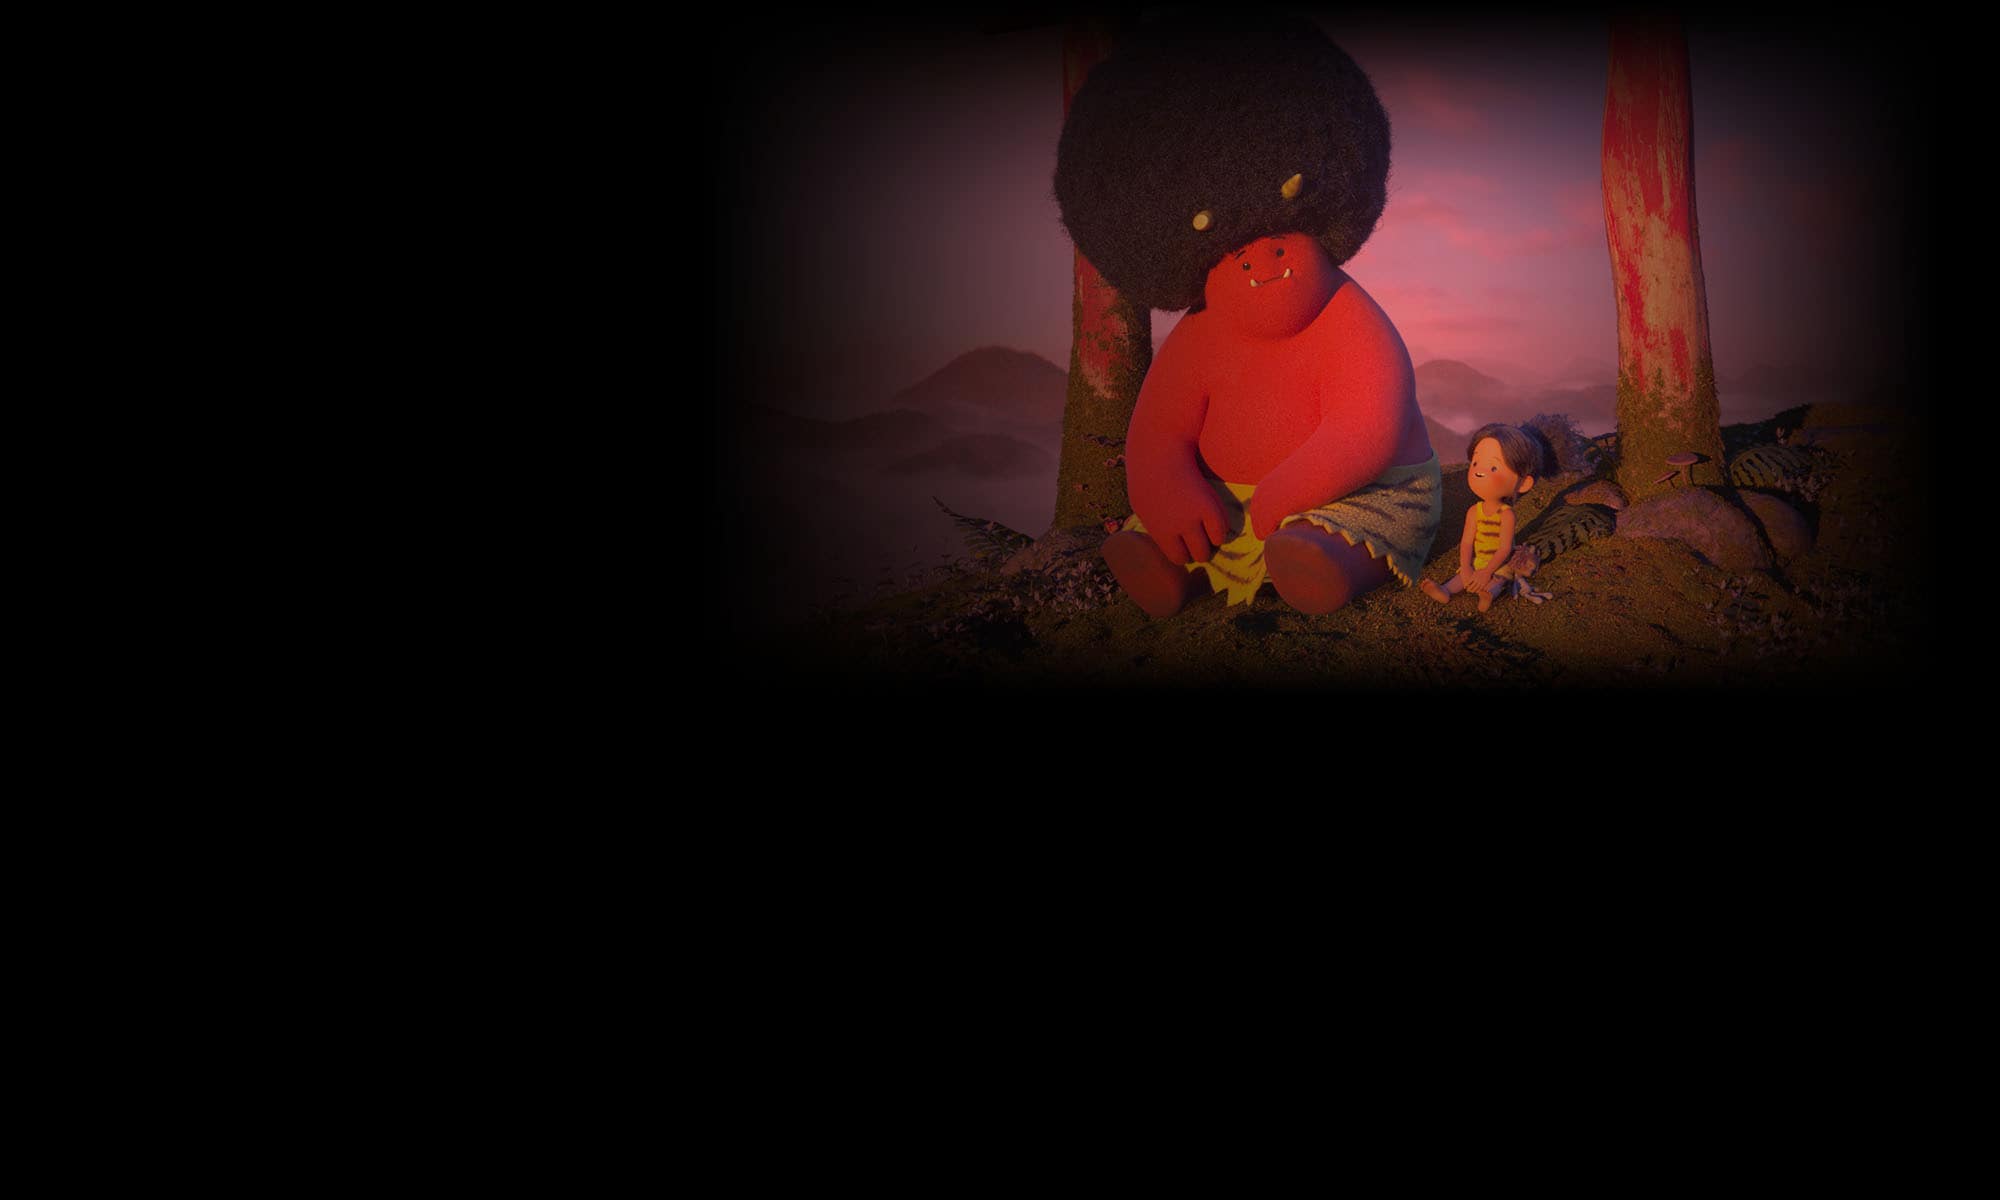 Two 3D animated characters, a little girl and giant red monster, sit together in a primeval landscape.